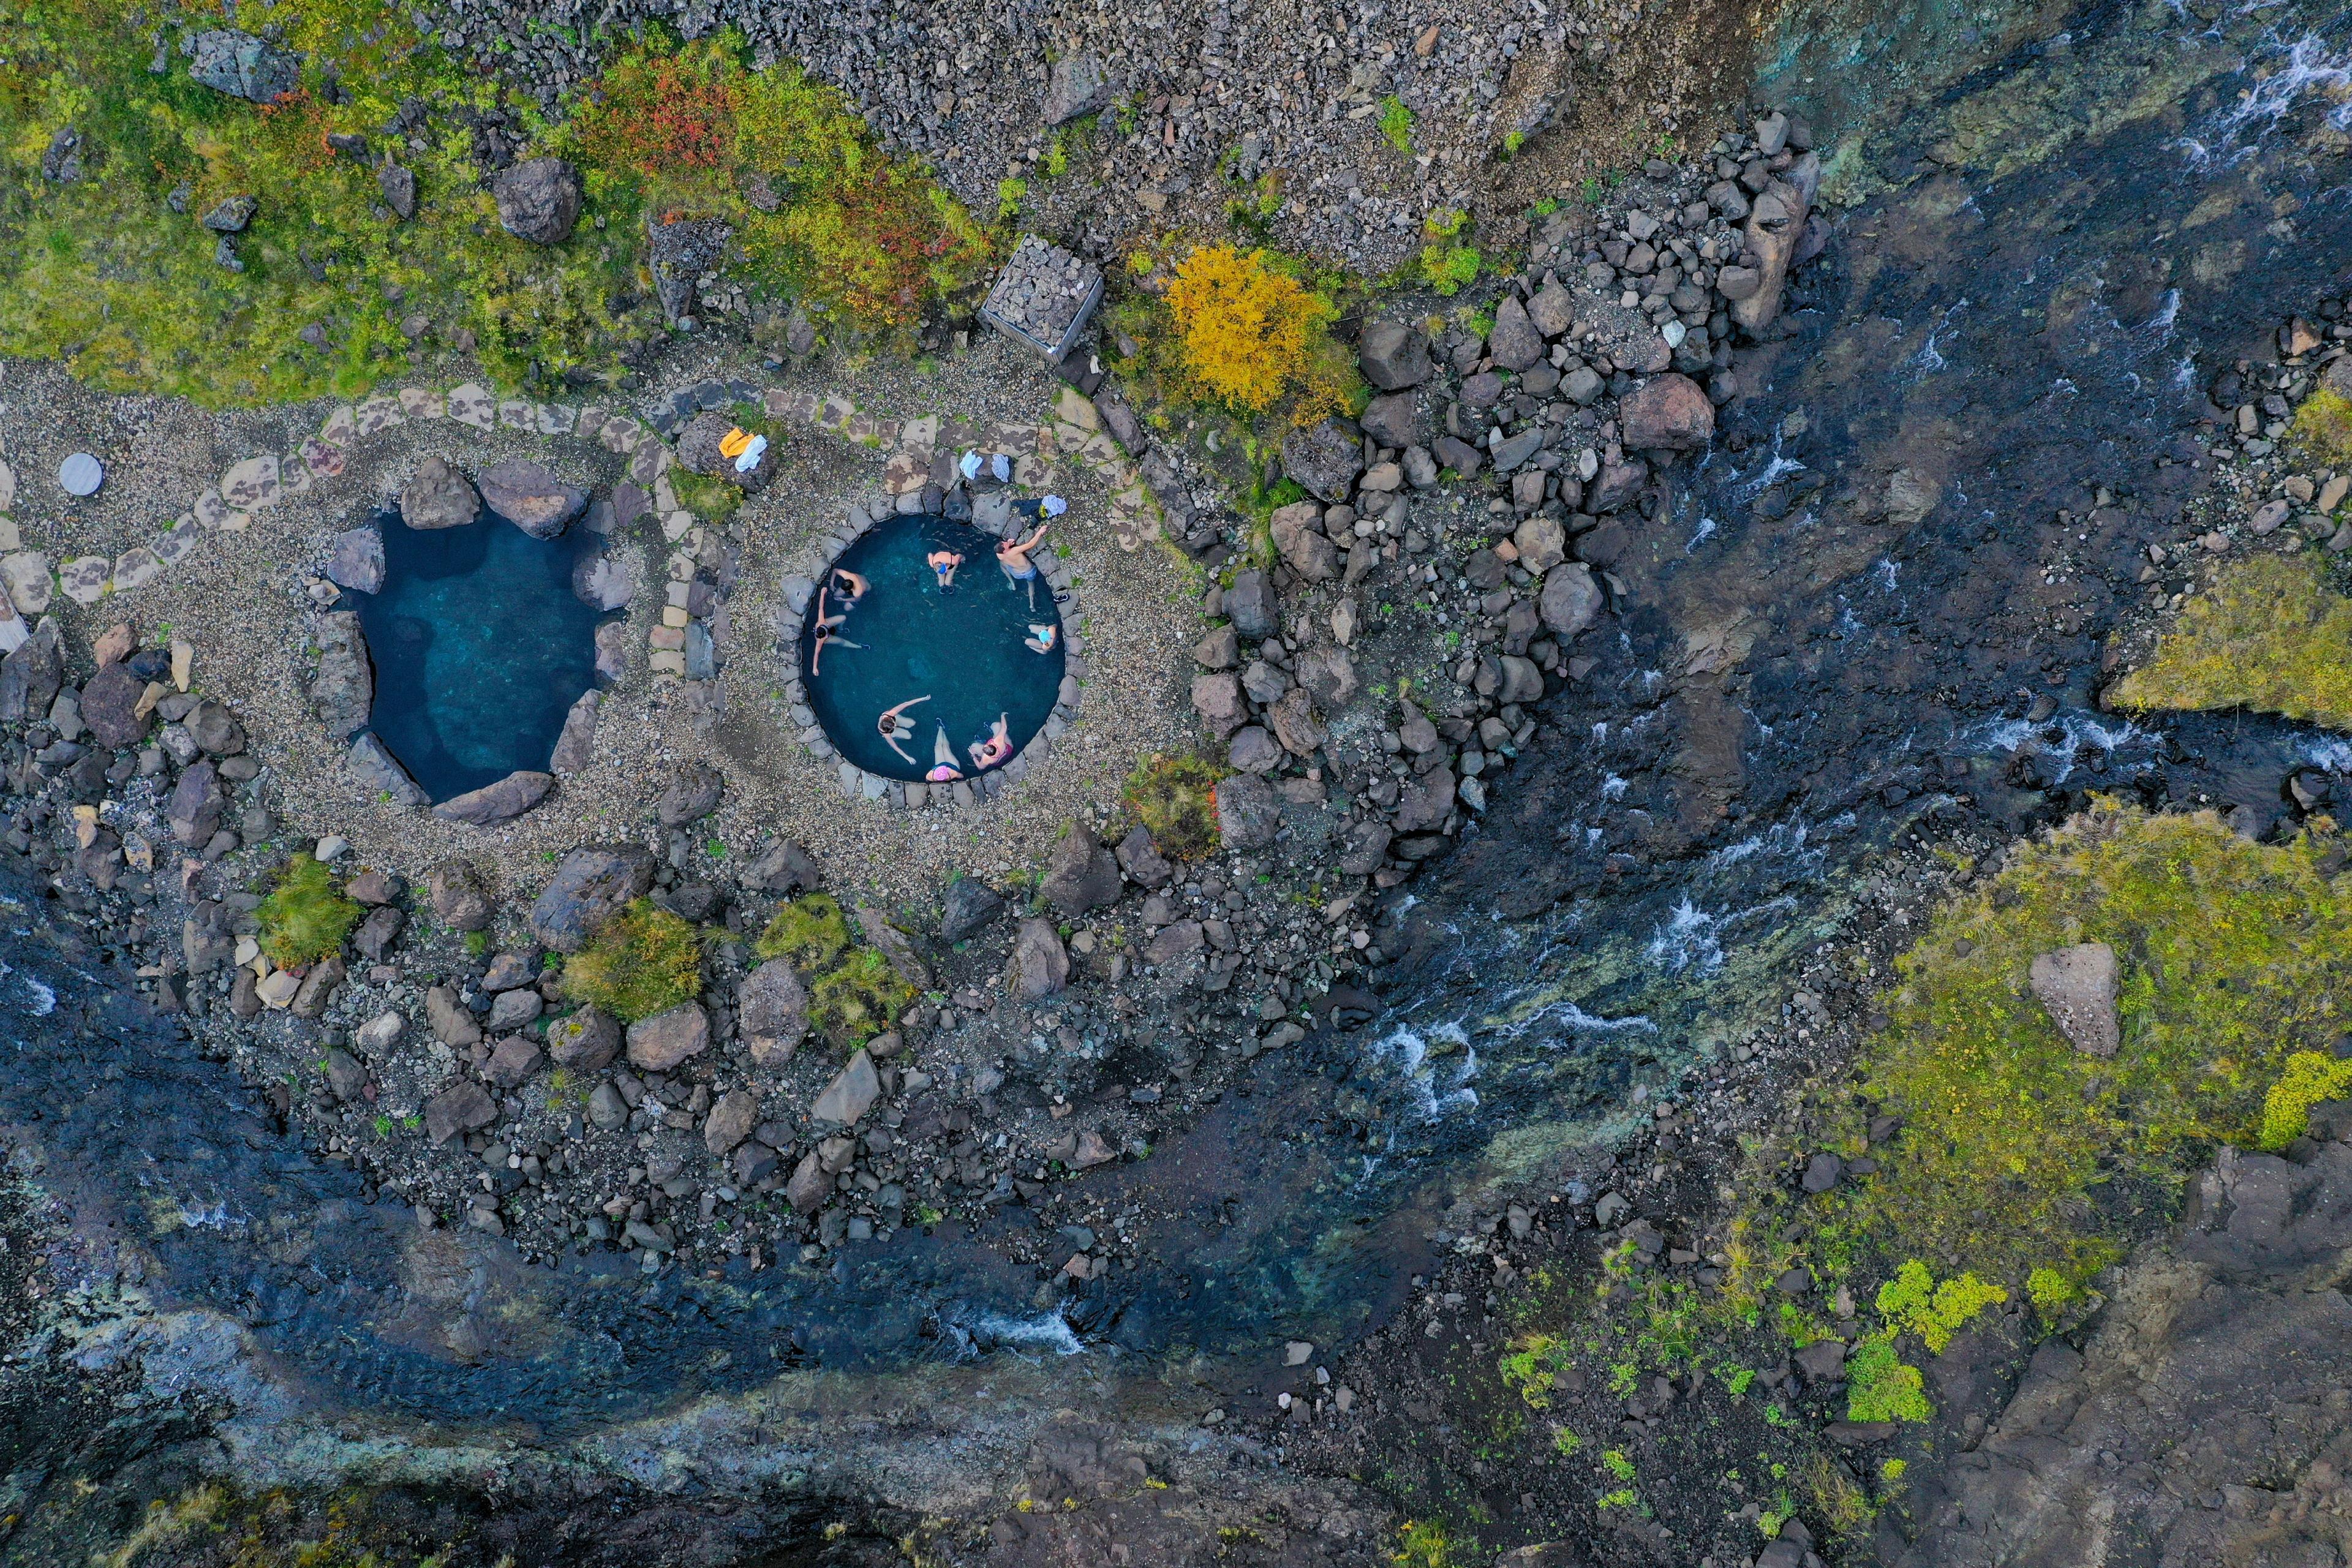 Overhead image of people leisurely relaxing in small round warm pools.